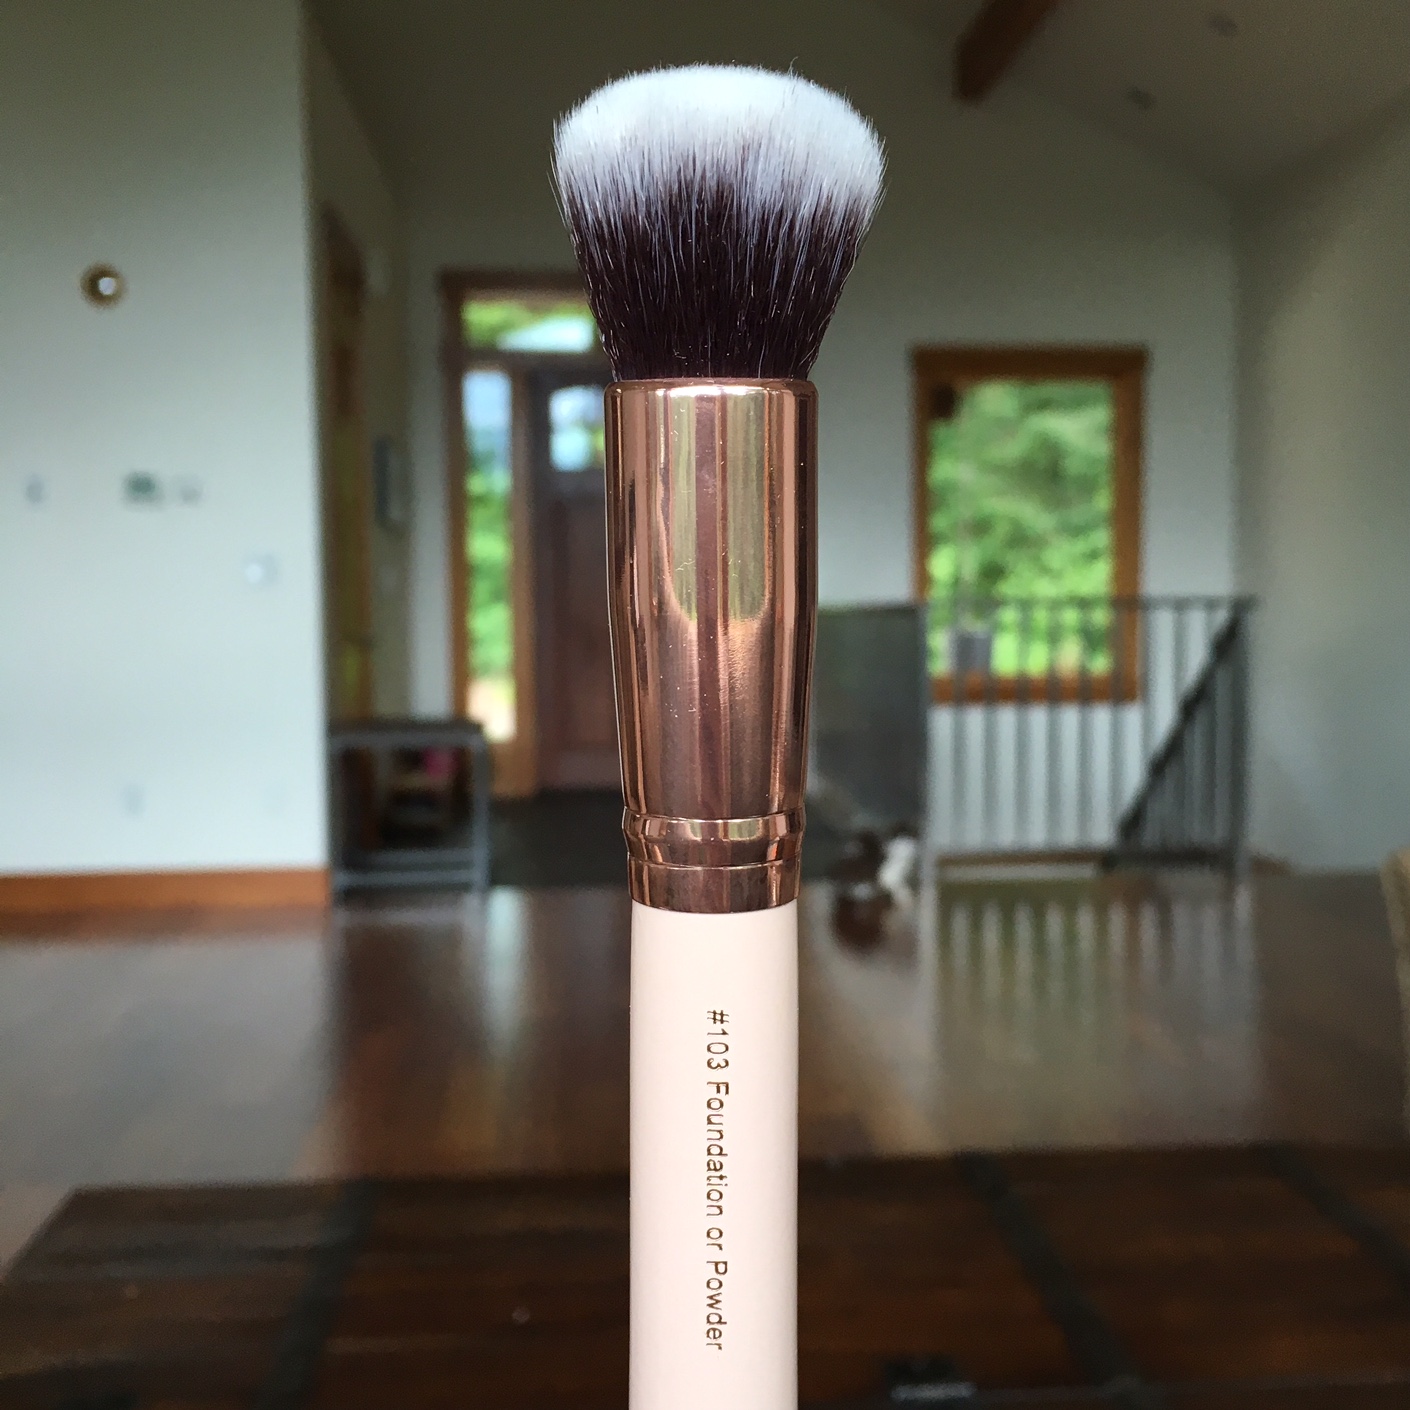 Glam Her Booth makeup brush